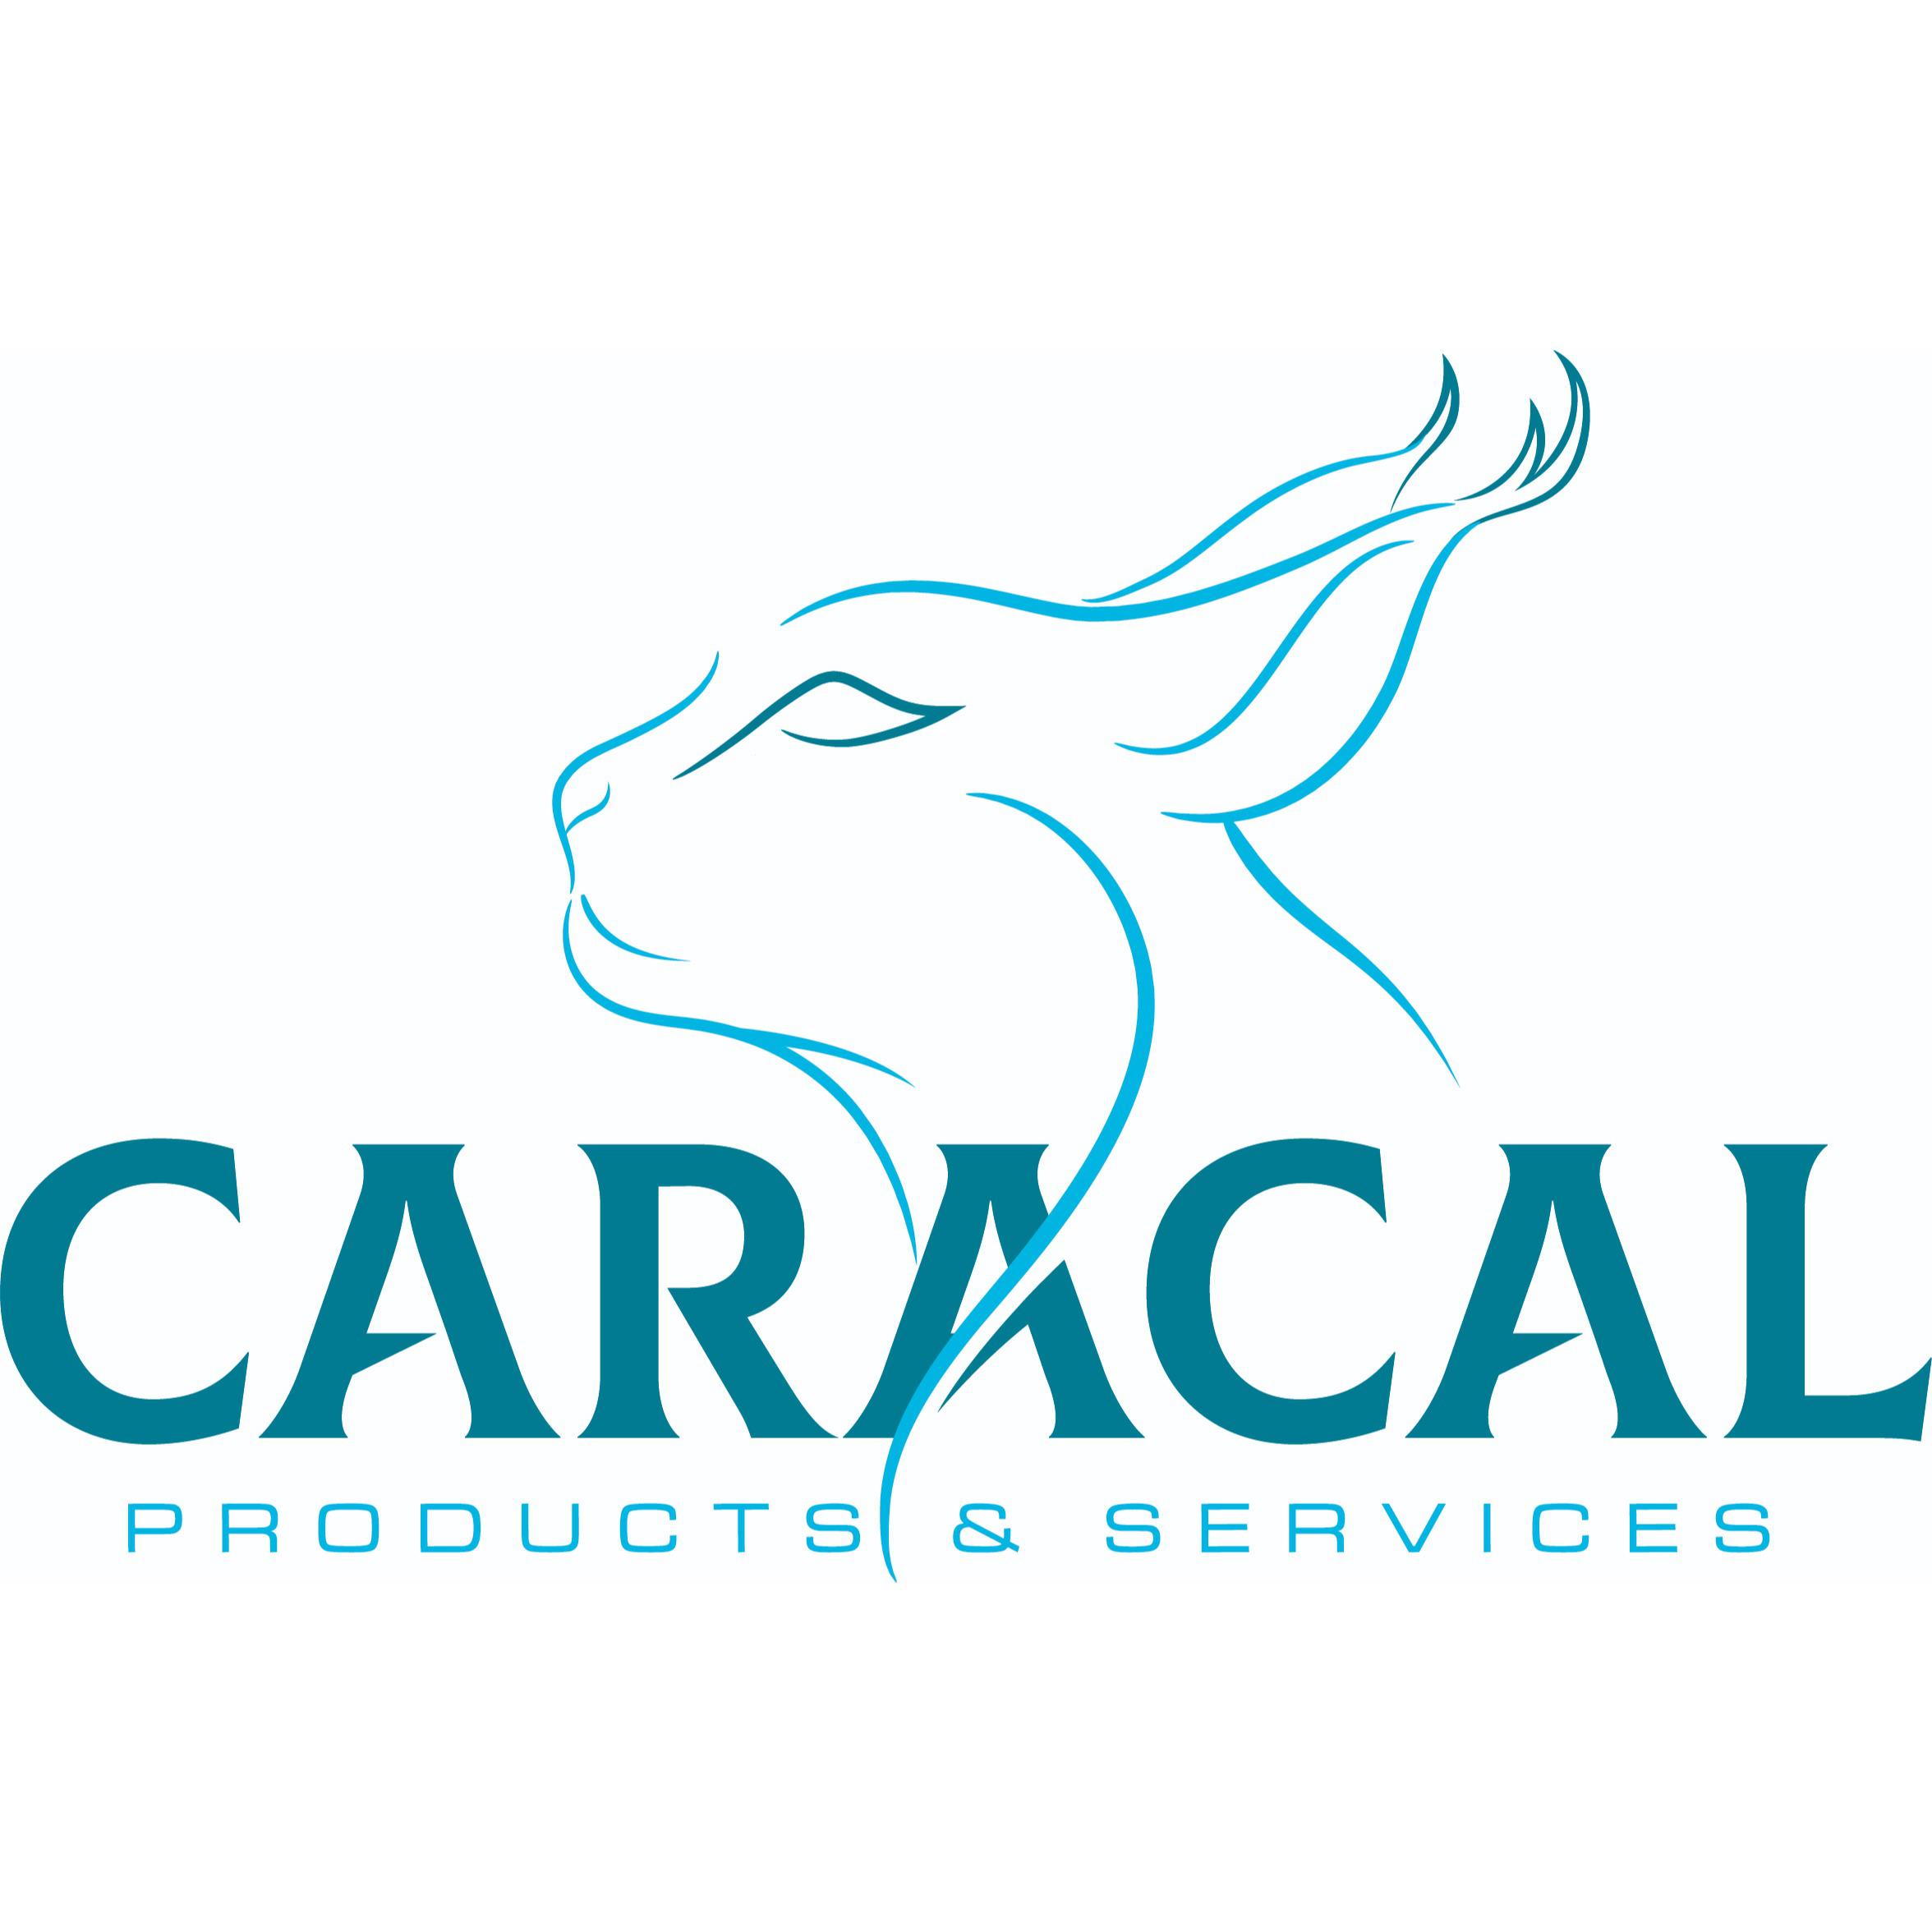 Caracal Products & Services